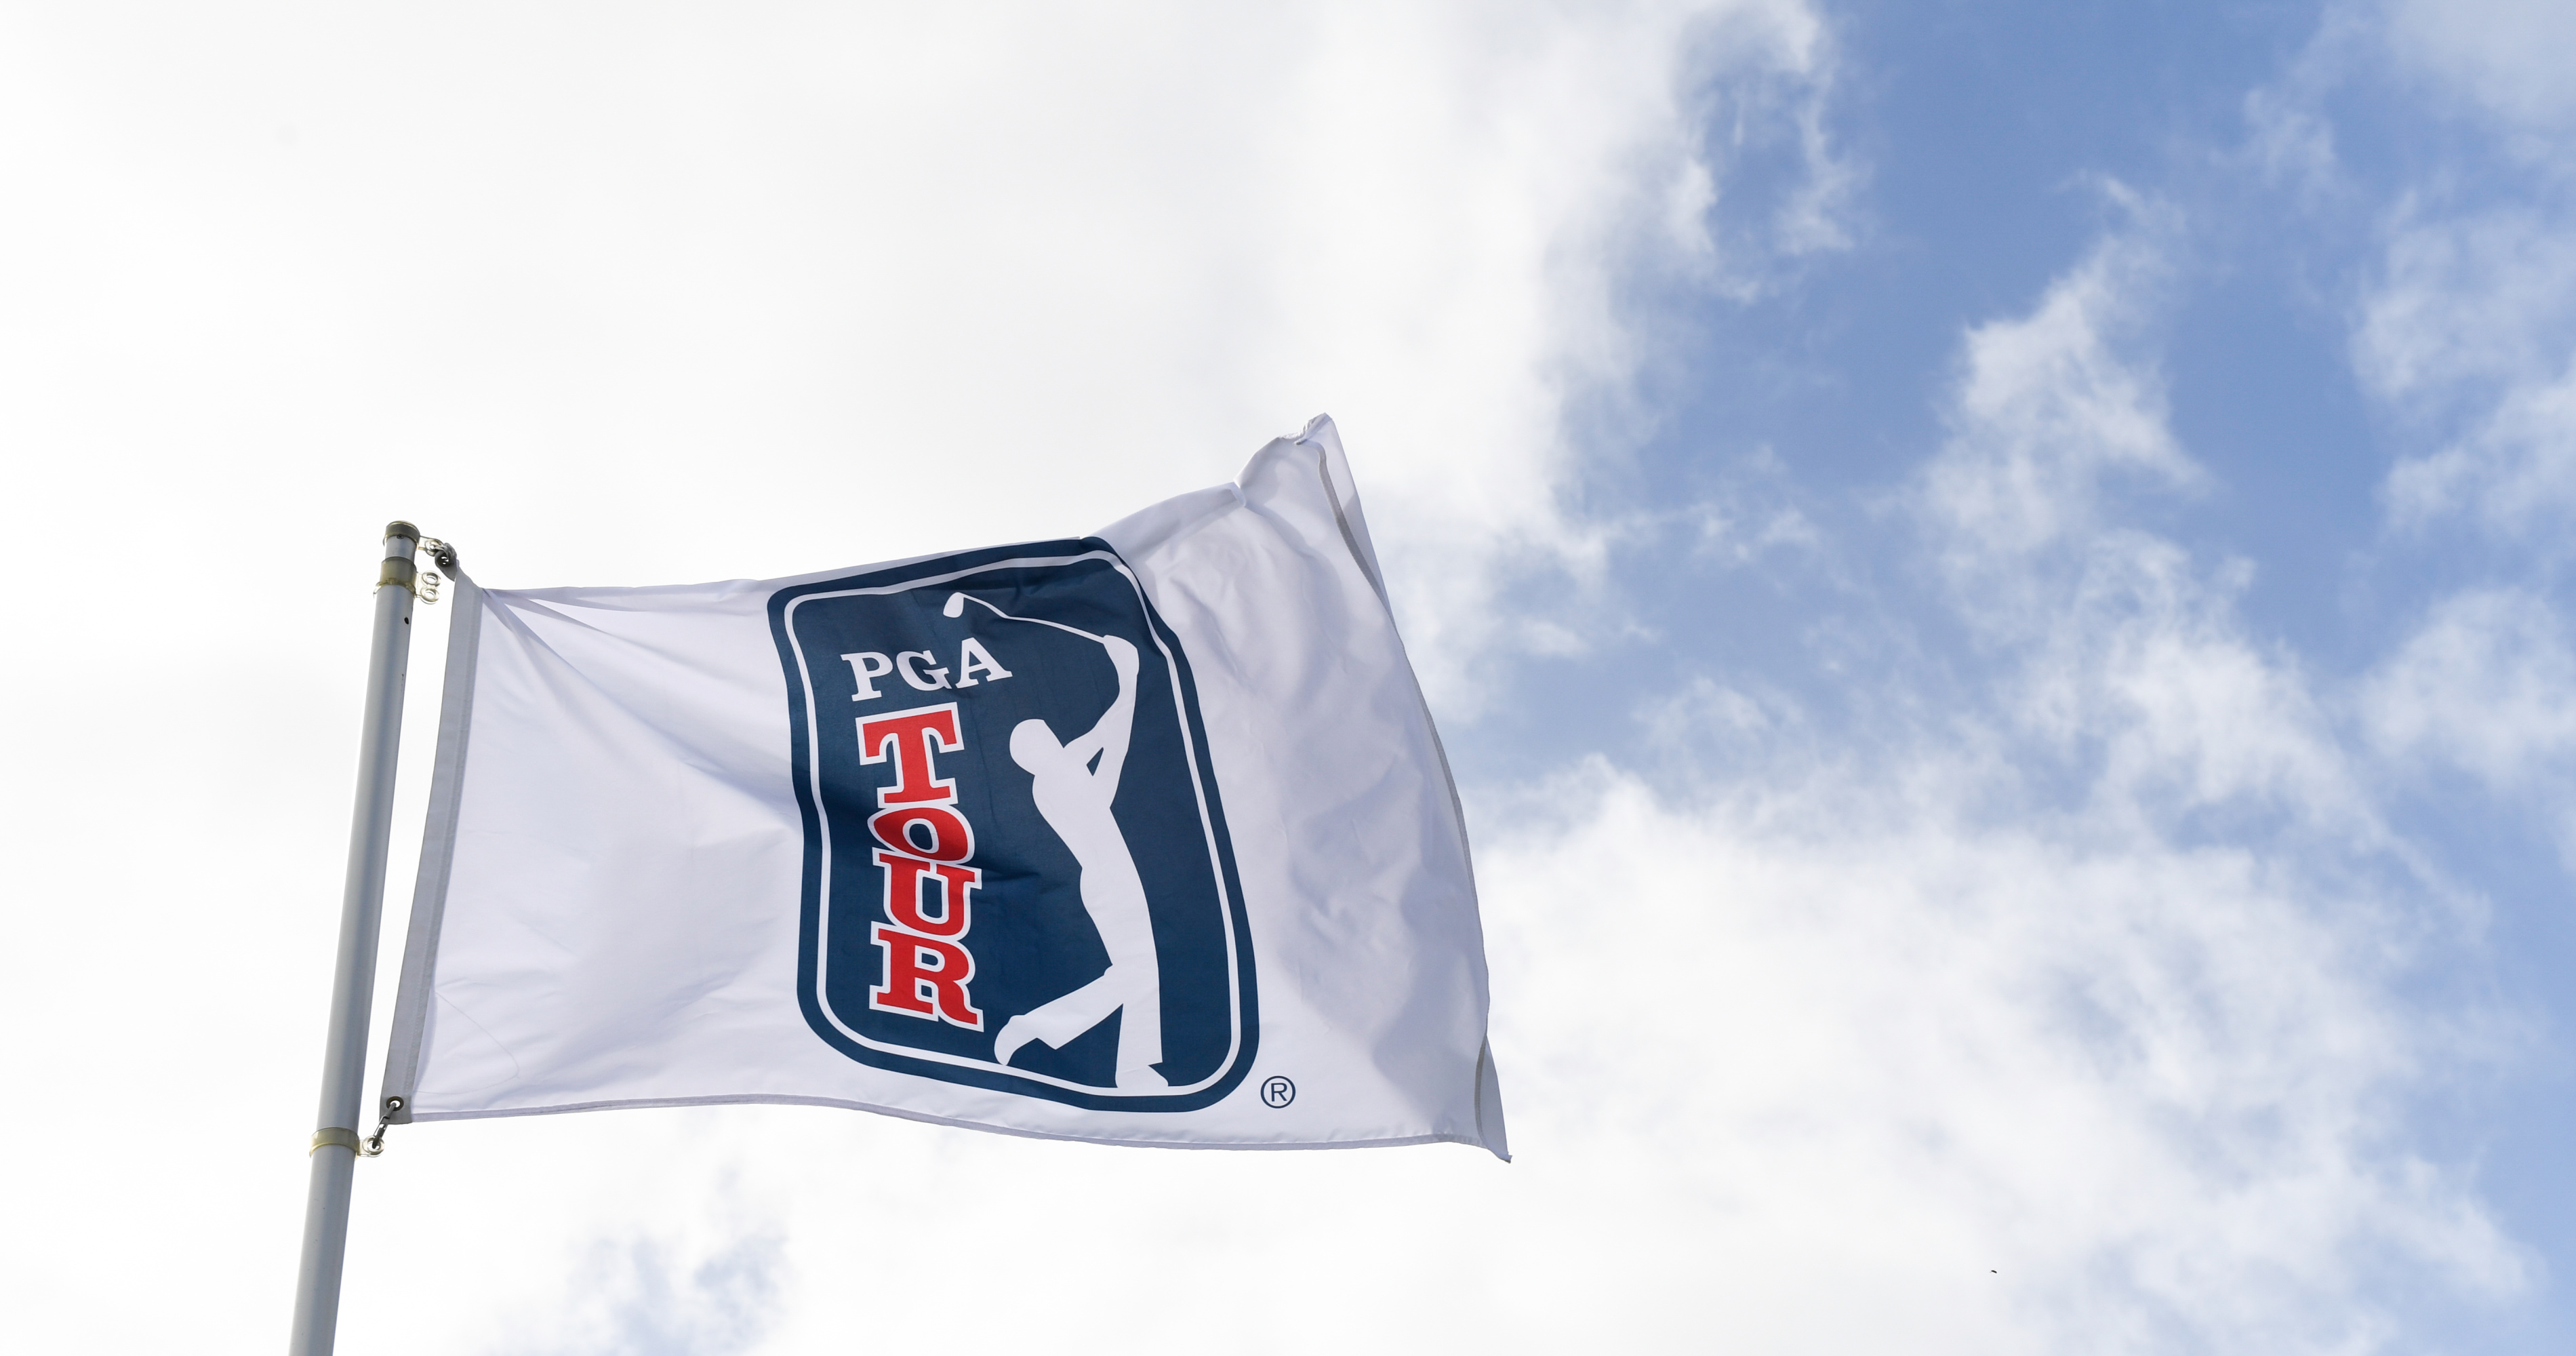 PGA Tour Turns Down Financial Partnership With Sports Agency Endeavor